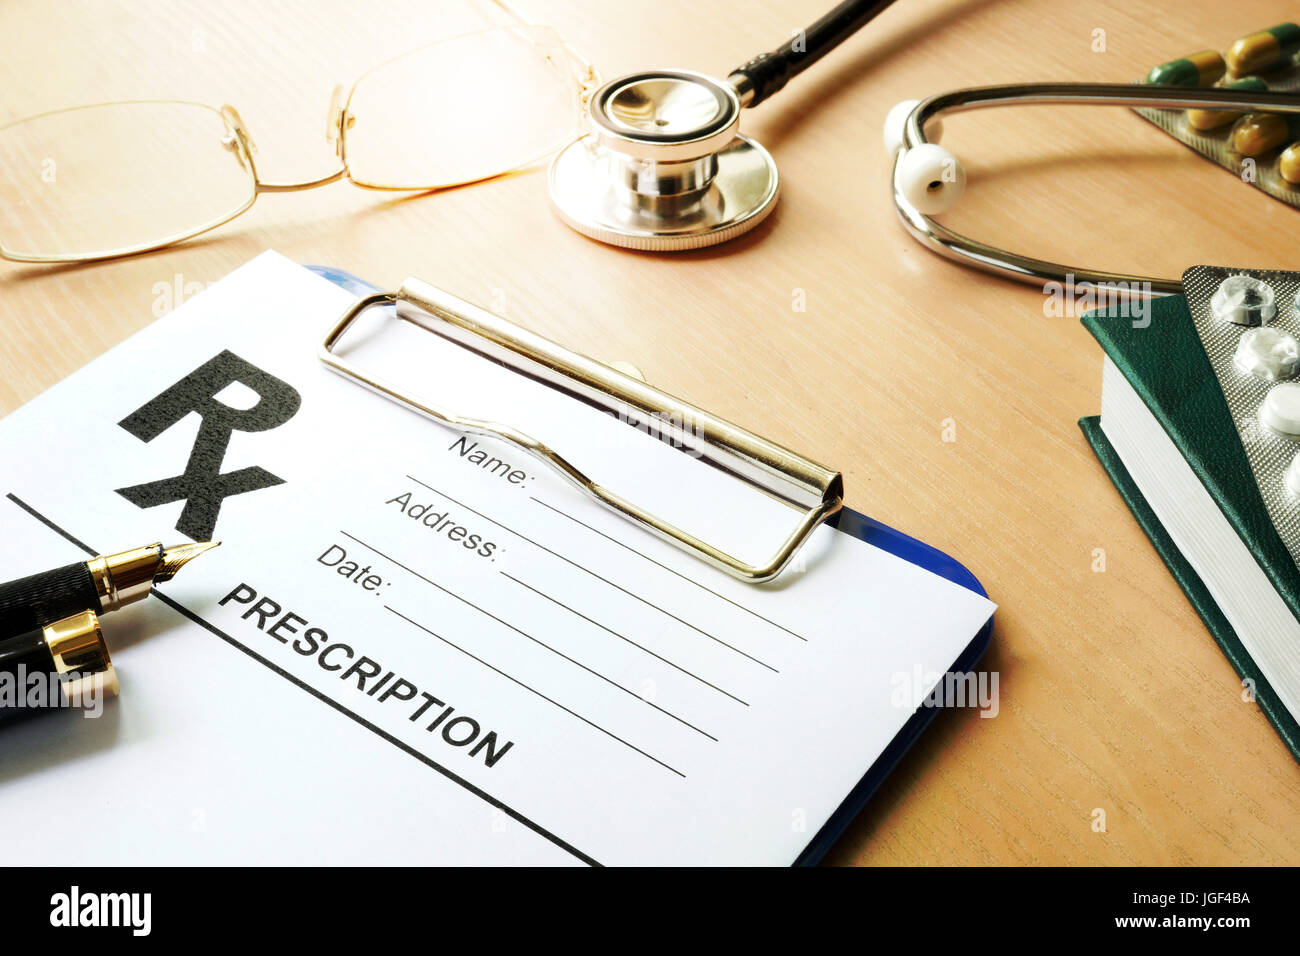 Doctor’s table with medical prescription form. Healthcare concept. Stock Photo